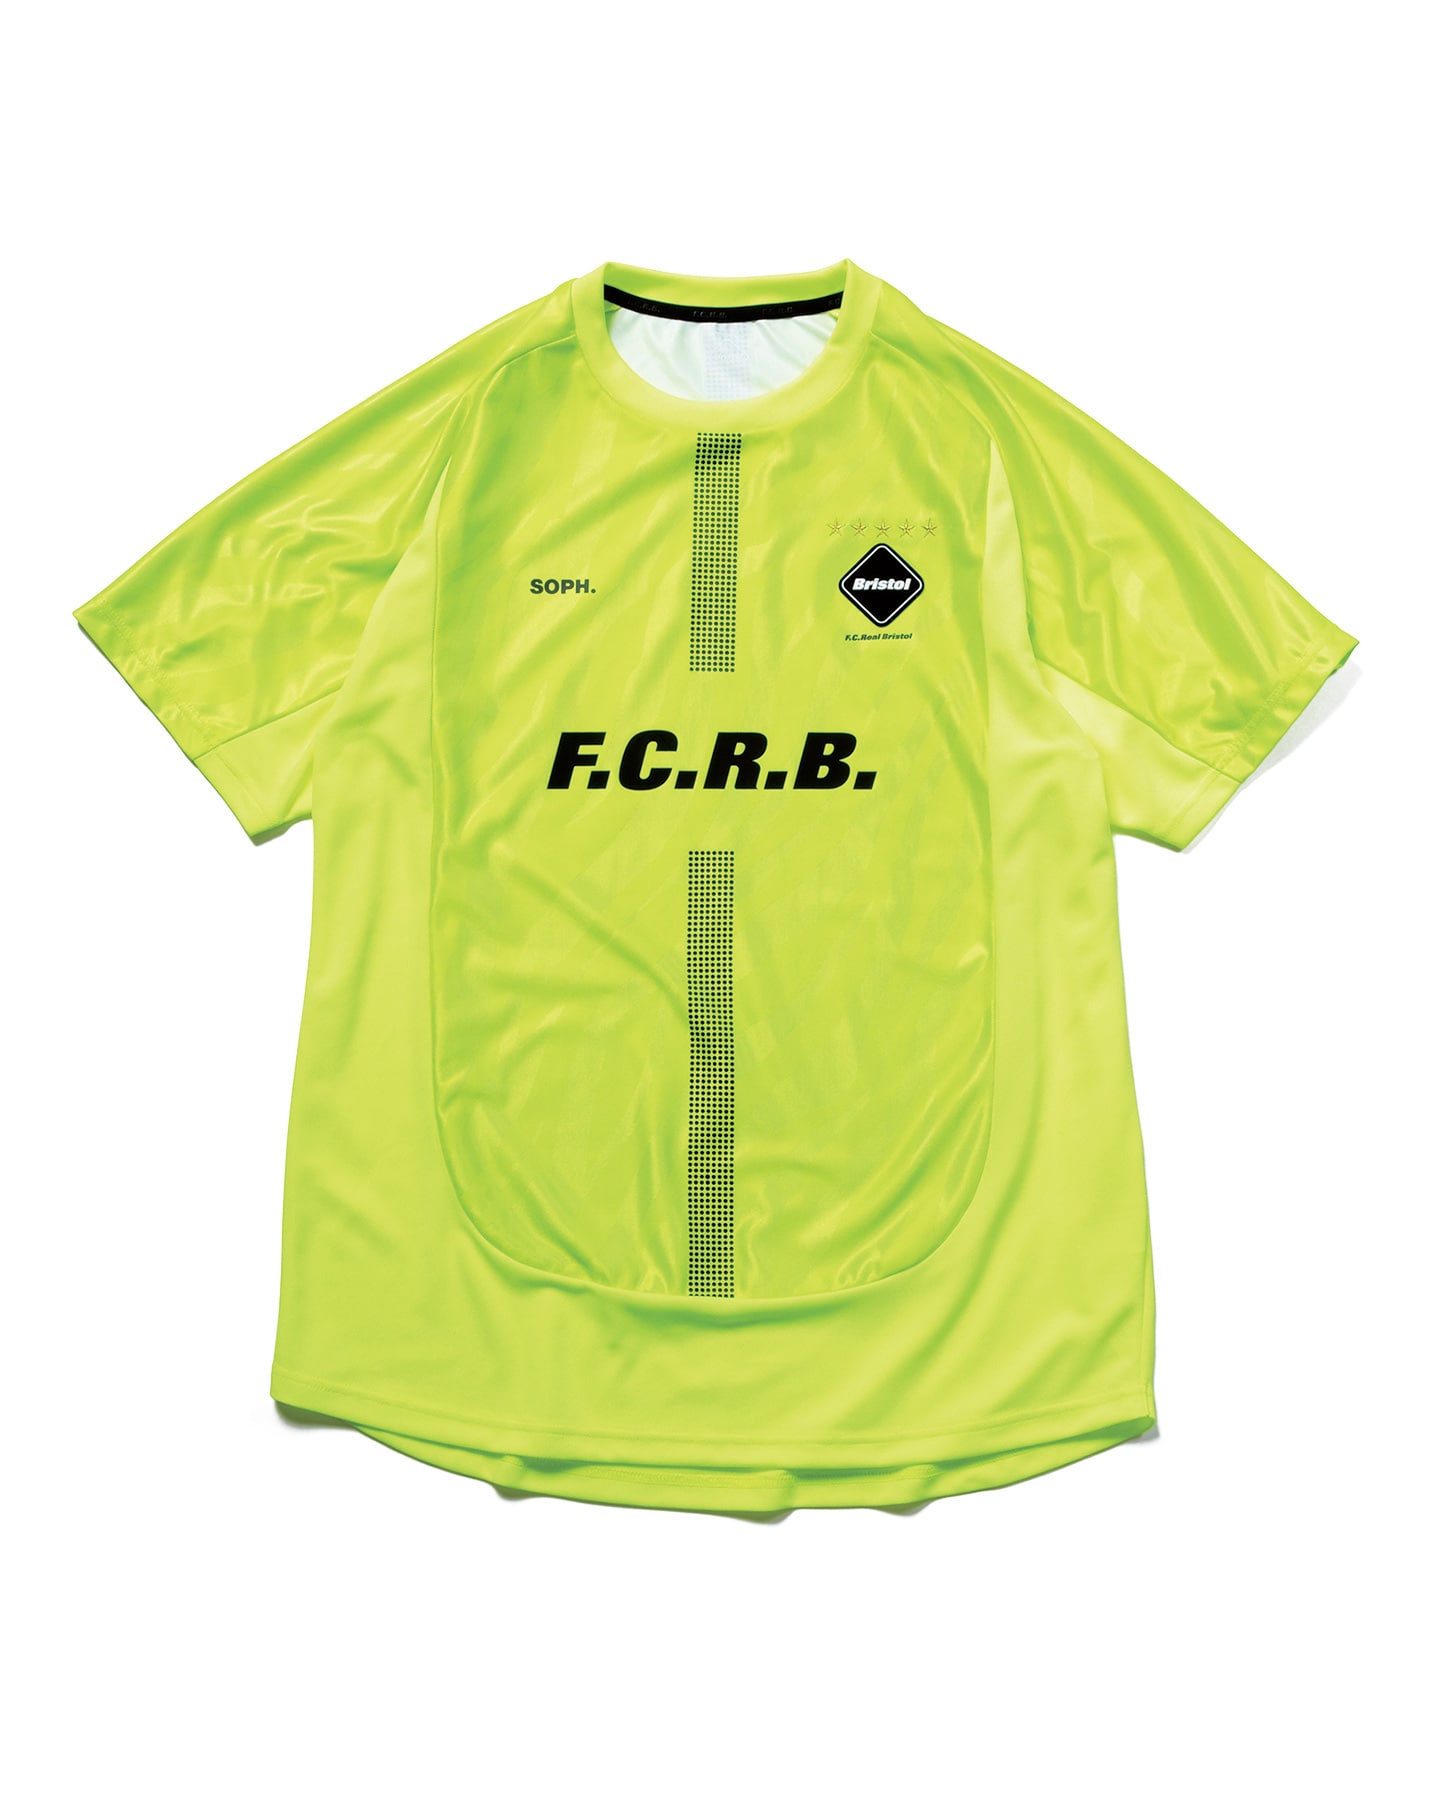 SOPH. | S/S PRE MATCH TOP(S YELLOW):